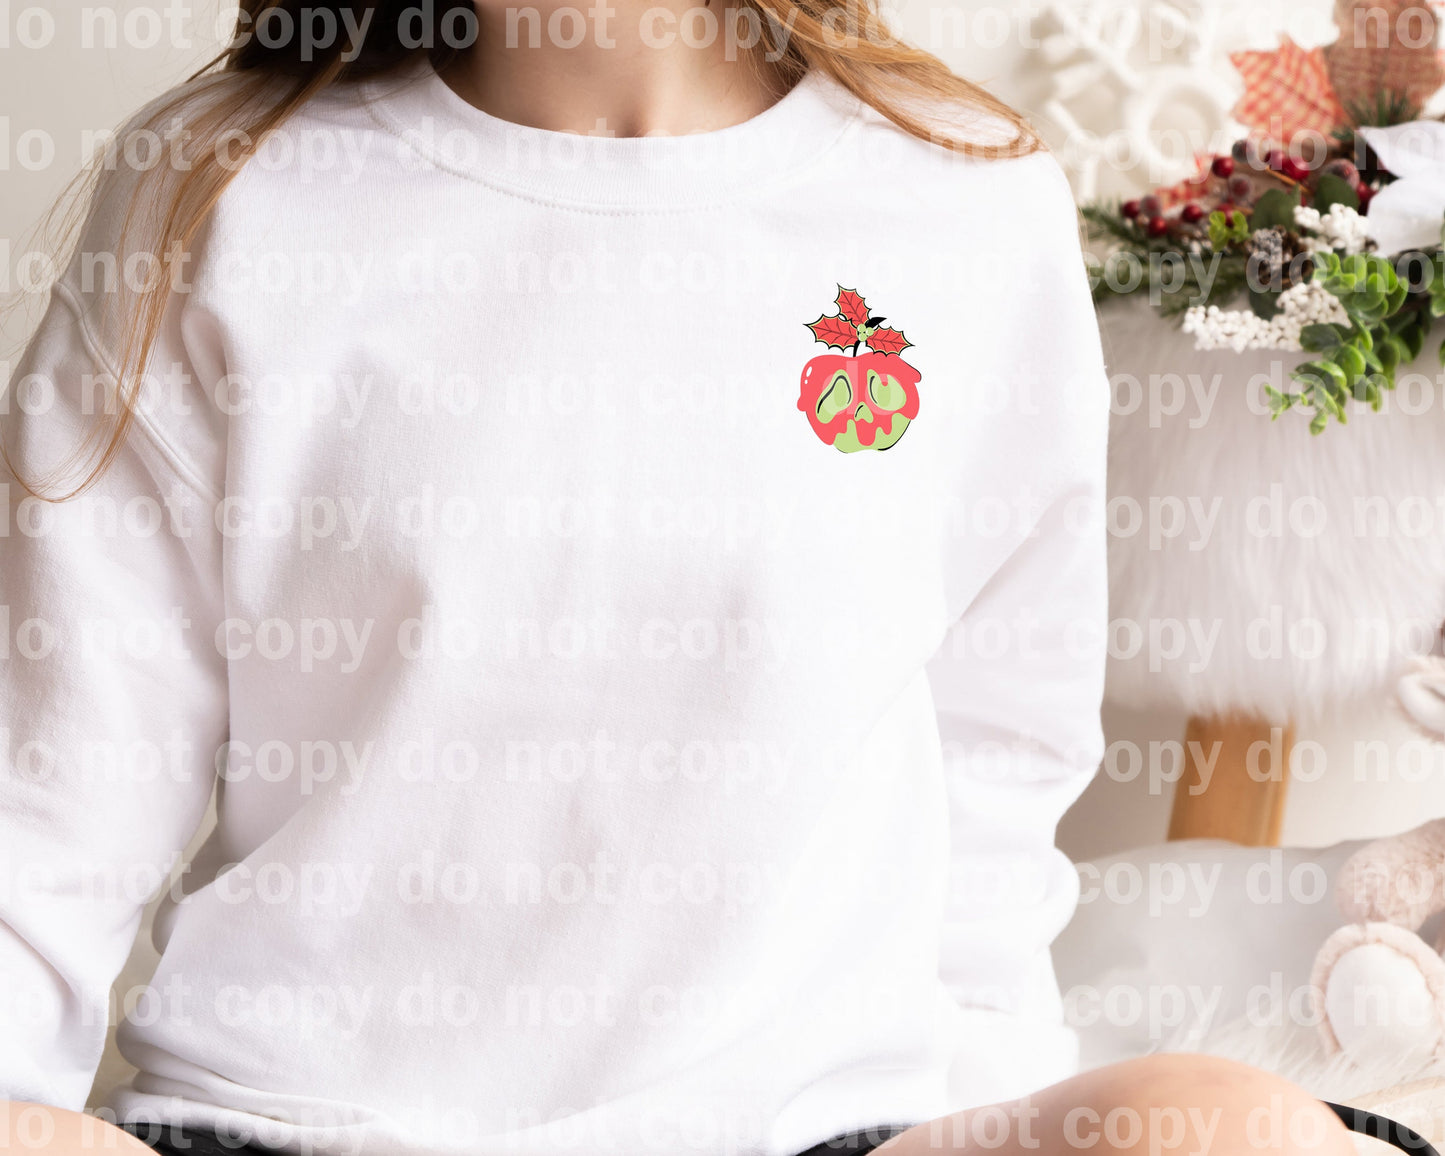 Holly Jolly Poison Apple with Pocket Option Dream Print or Sublimation Print